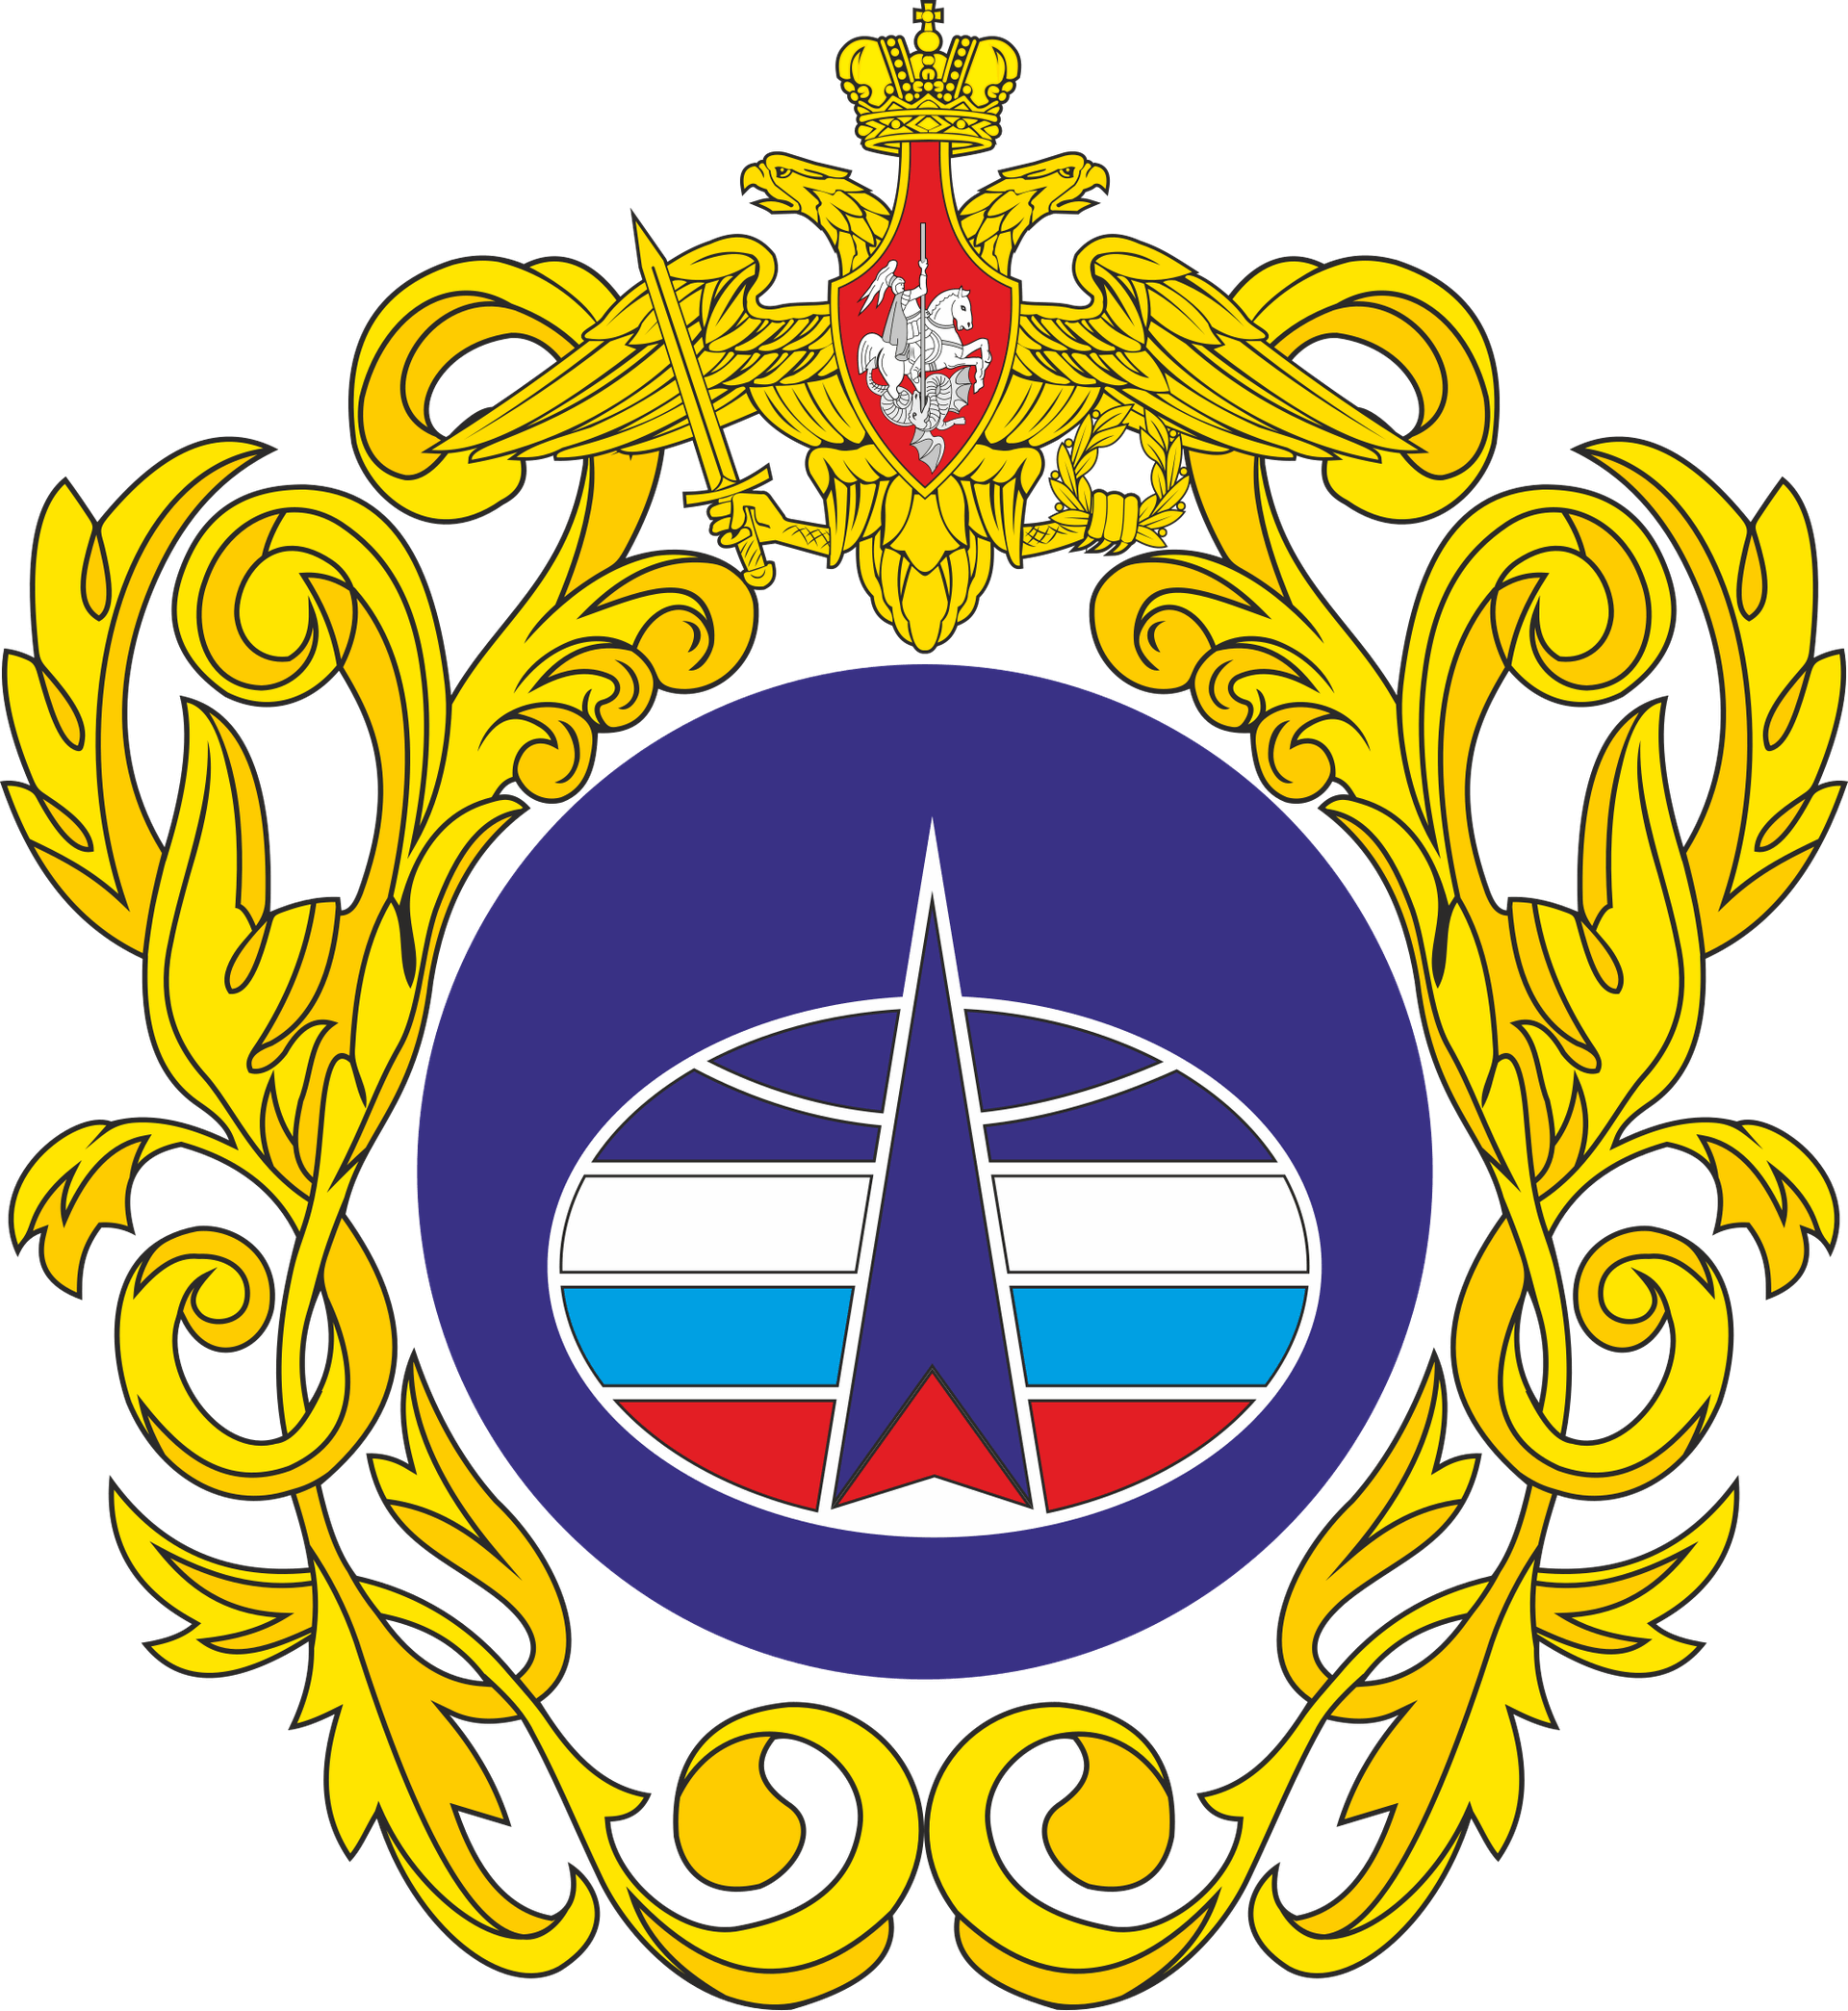 Russian Space Forces